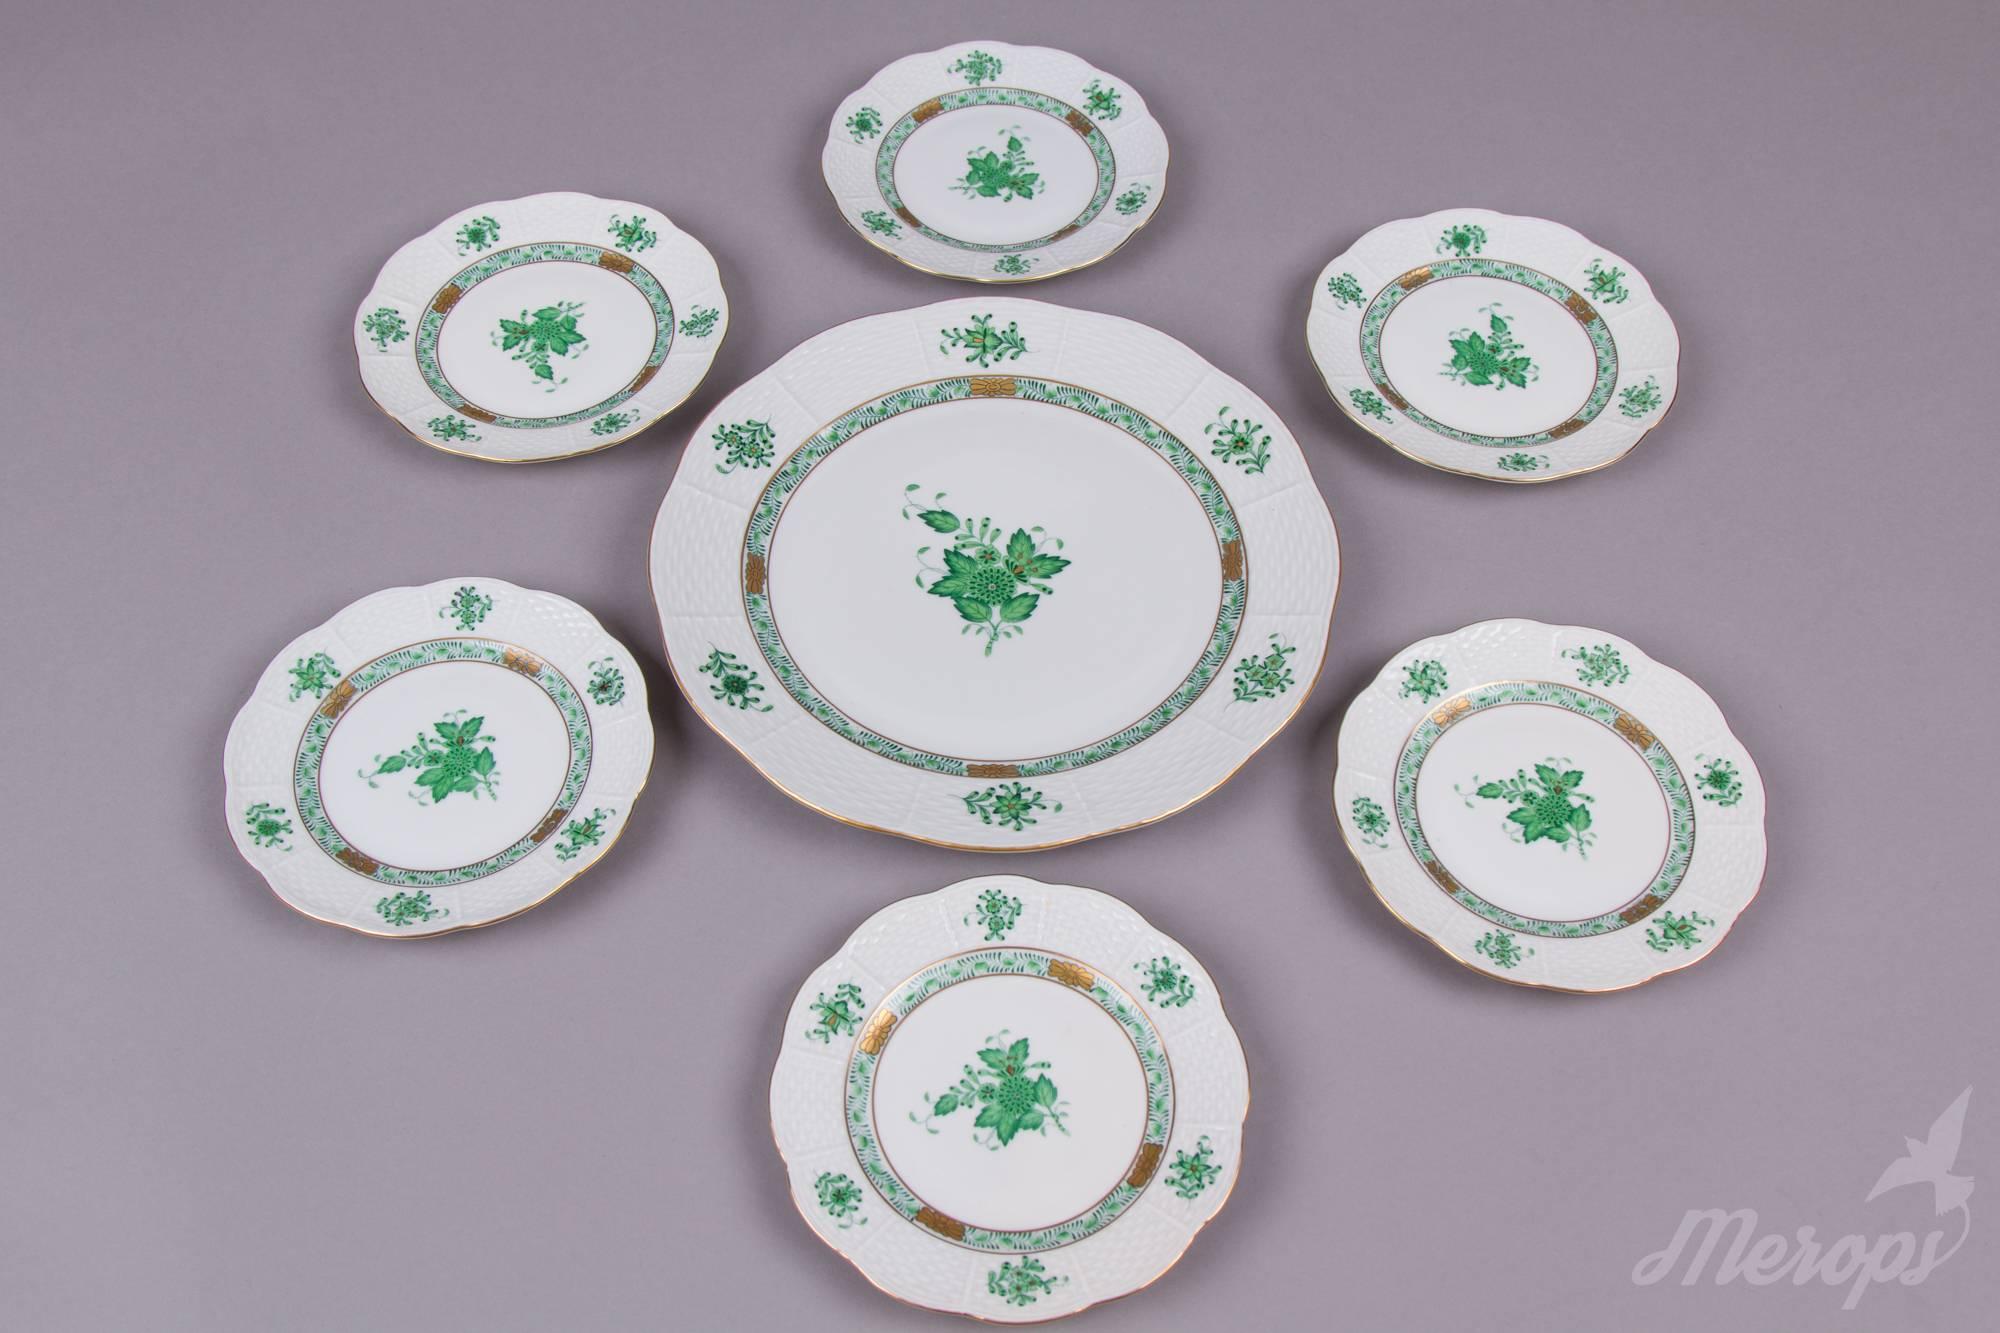 We ship this item worldwide for 70 USD with insurance. Shipping usually takes three-seven business days. Express shipping with FedEx (two days) available for 110 USD.

Manufacturer: Herend porcelain manufactory (Hungary).
Quality: Hand-painted,